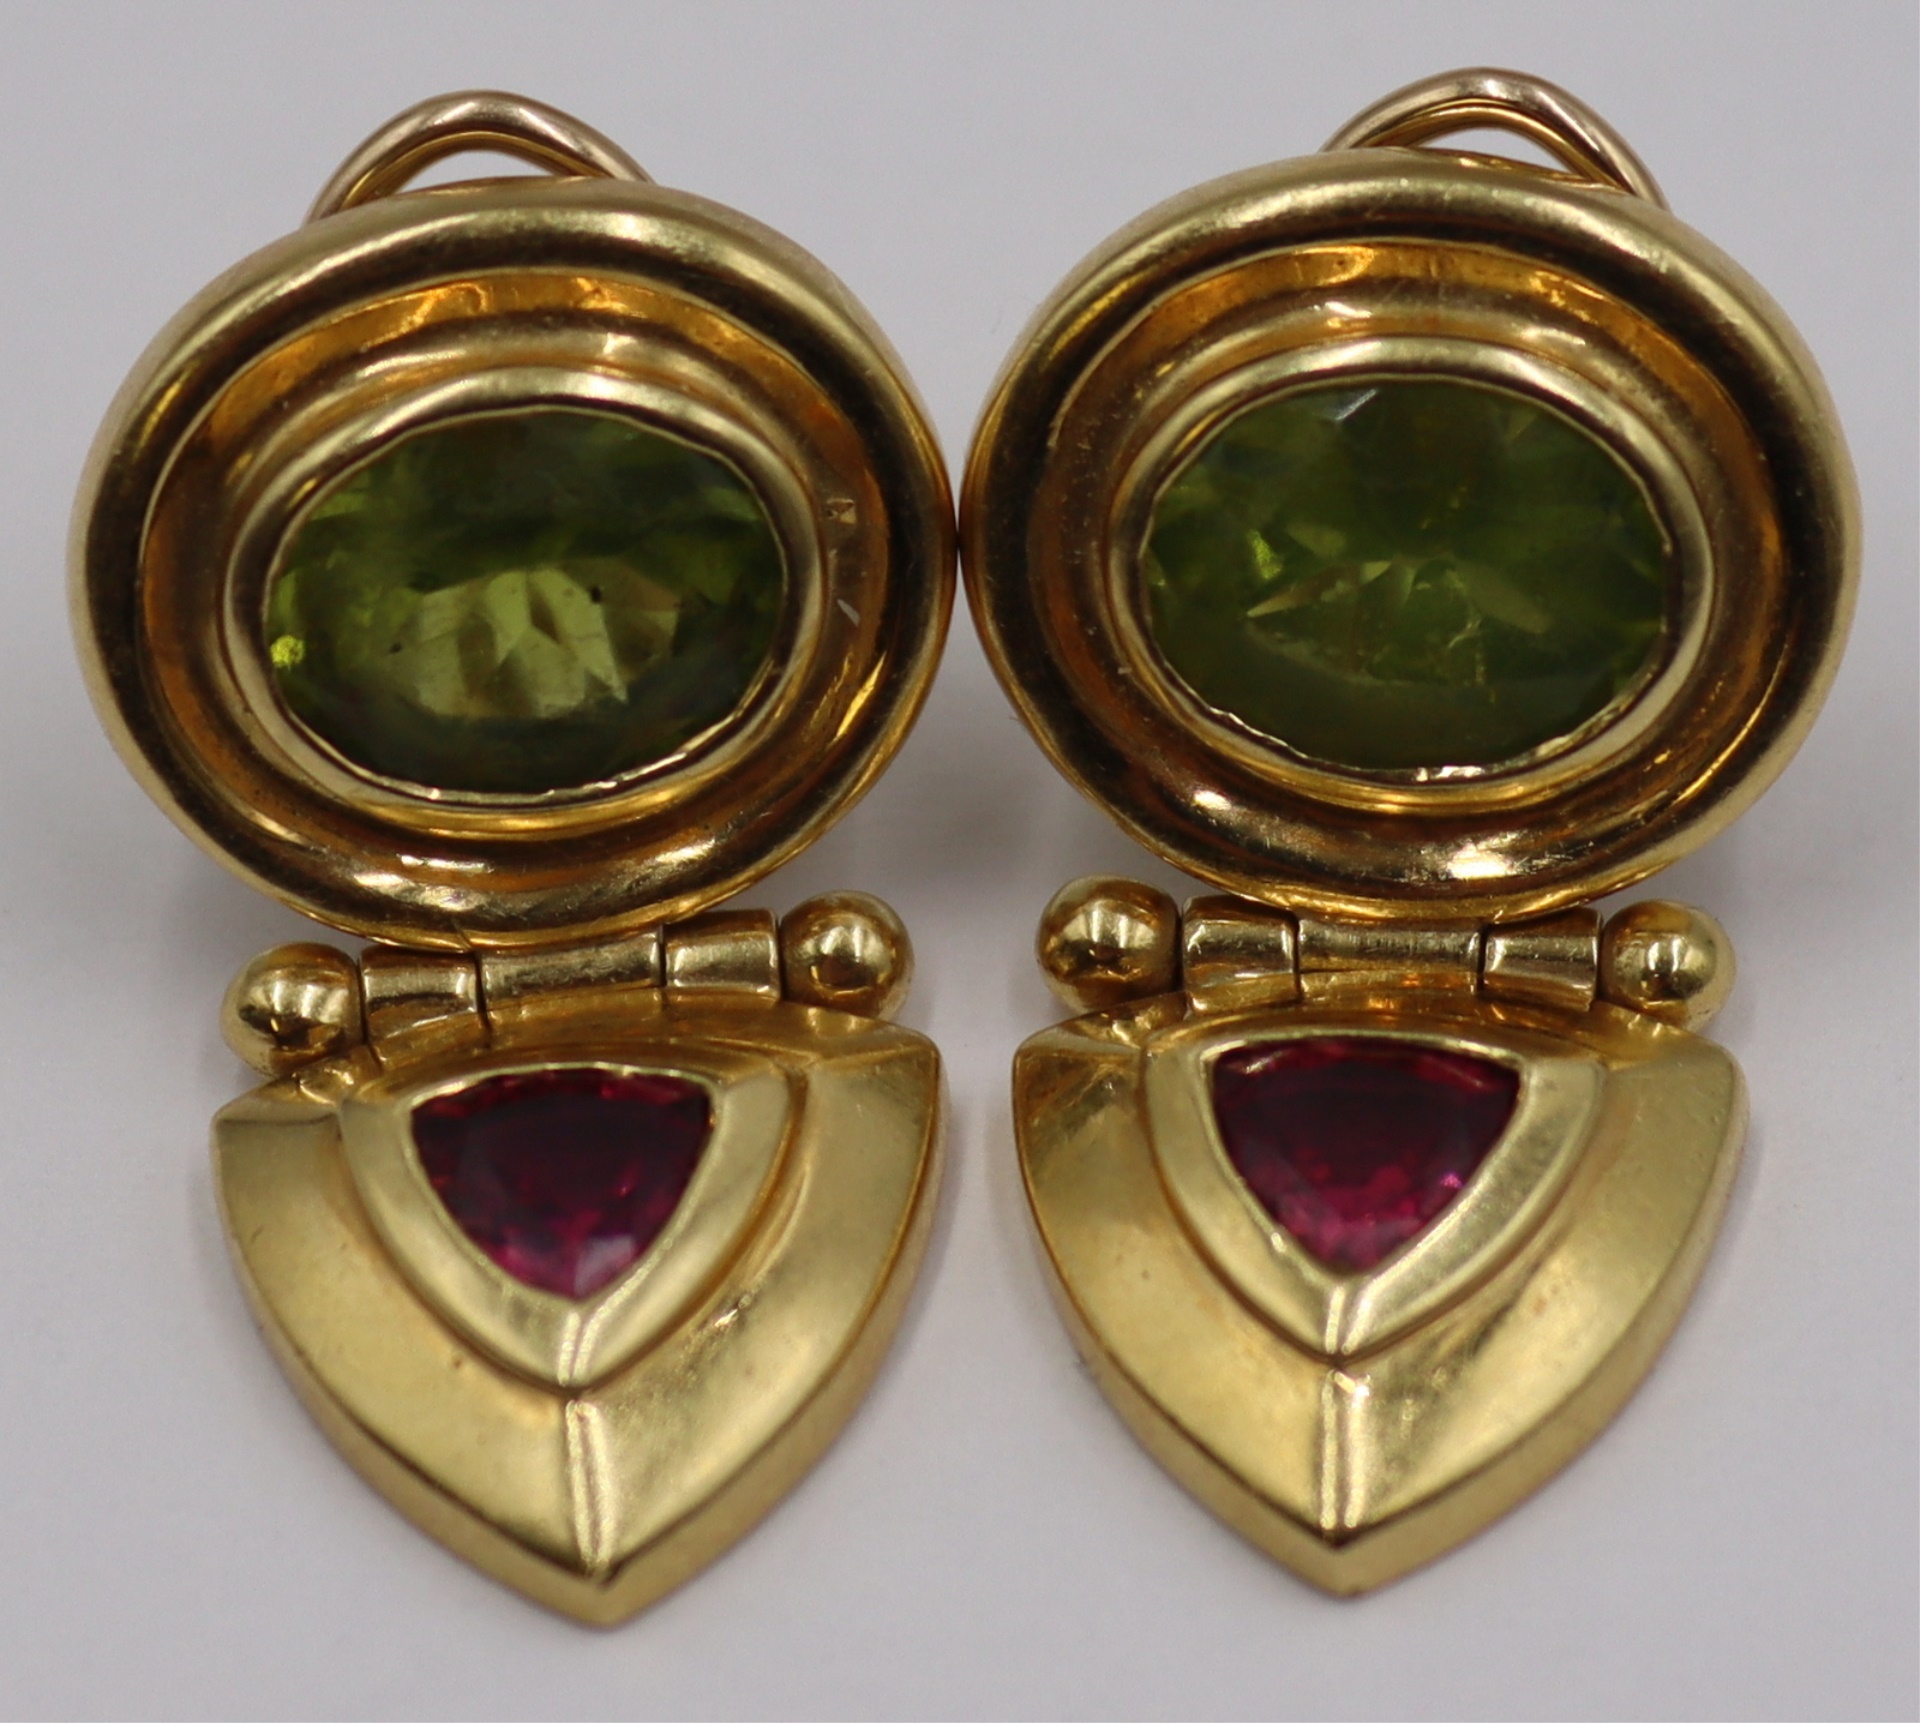 JEWELRY PAIR OF 14KT GOLD AND 3bd445